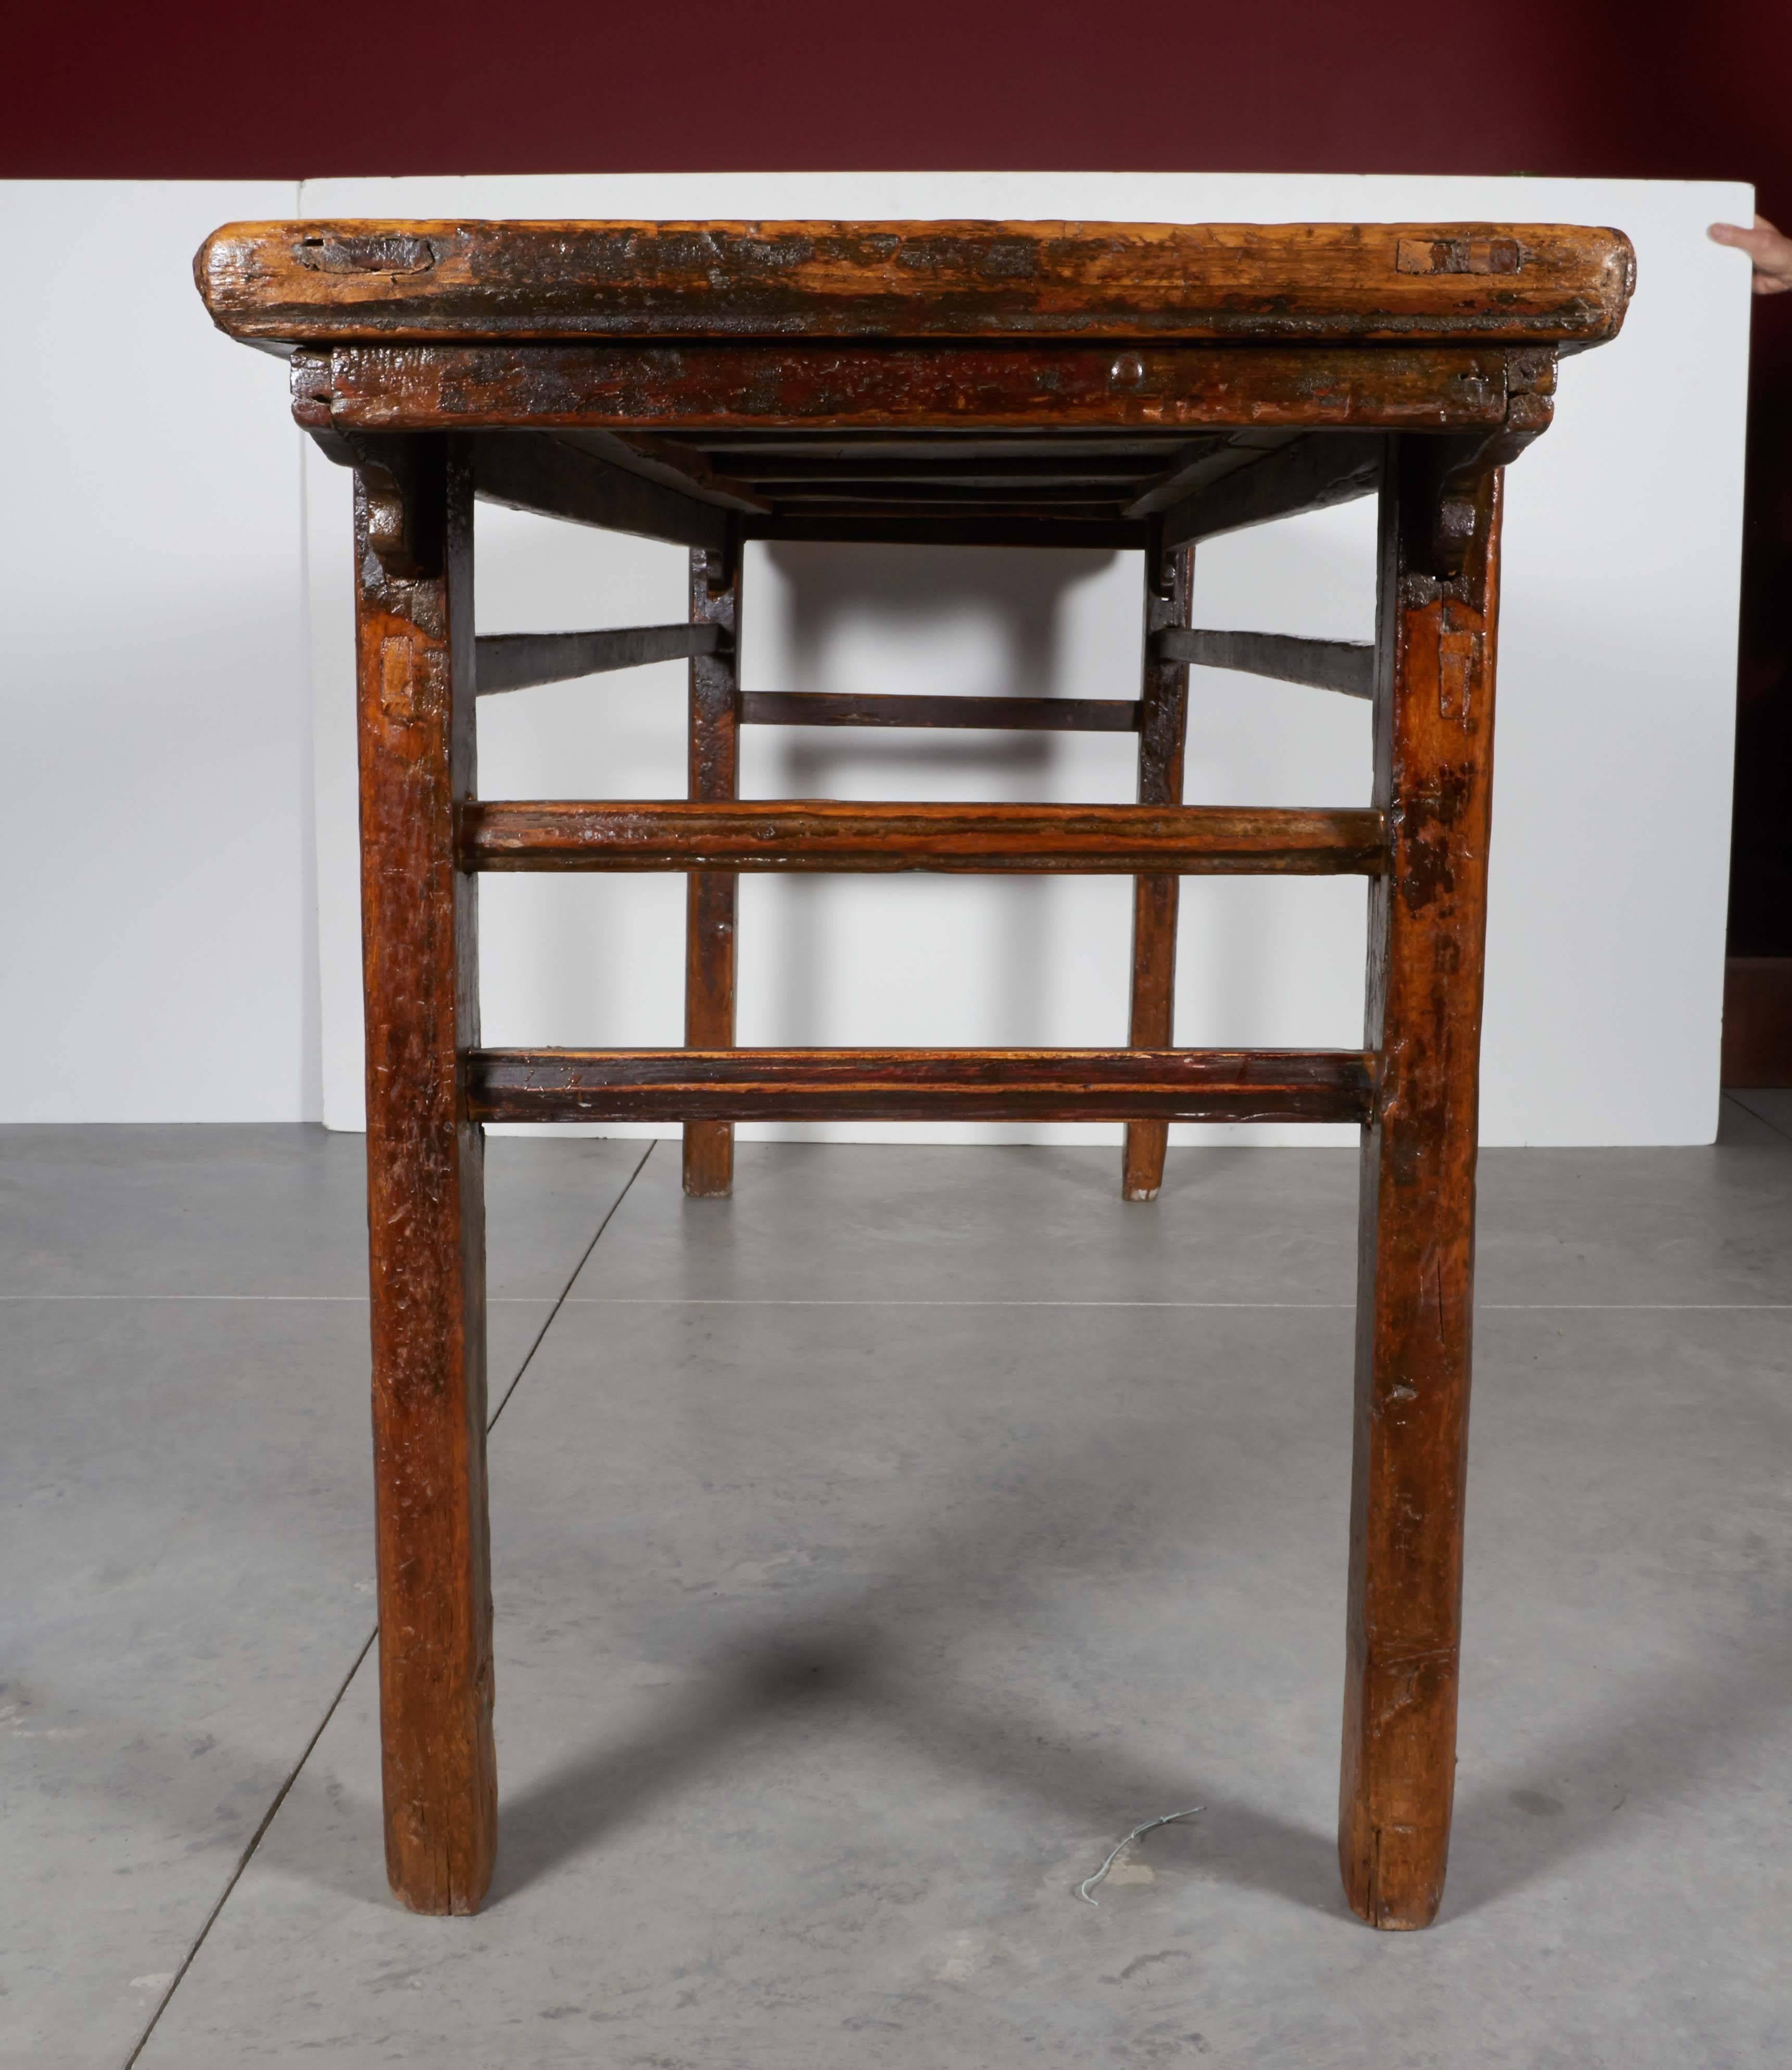 Heavily Lacquered Rustic Antique Painting Table 2